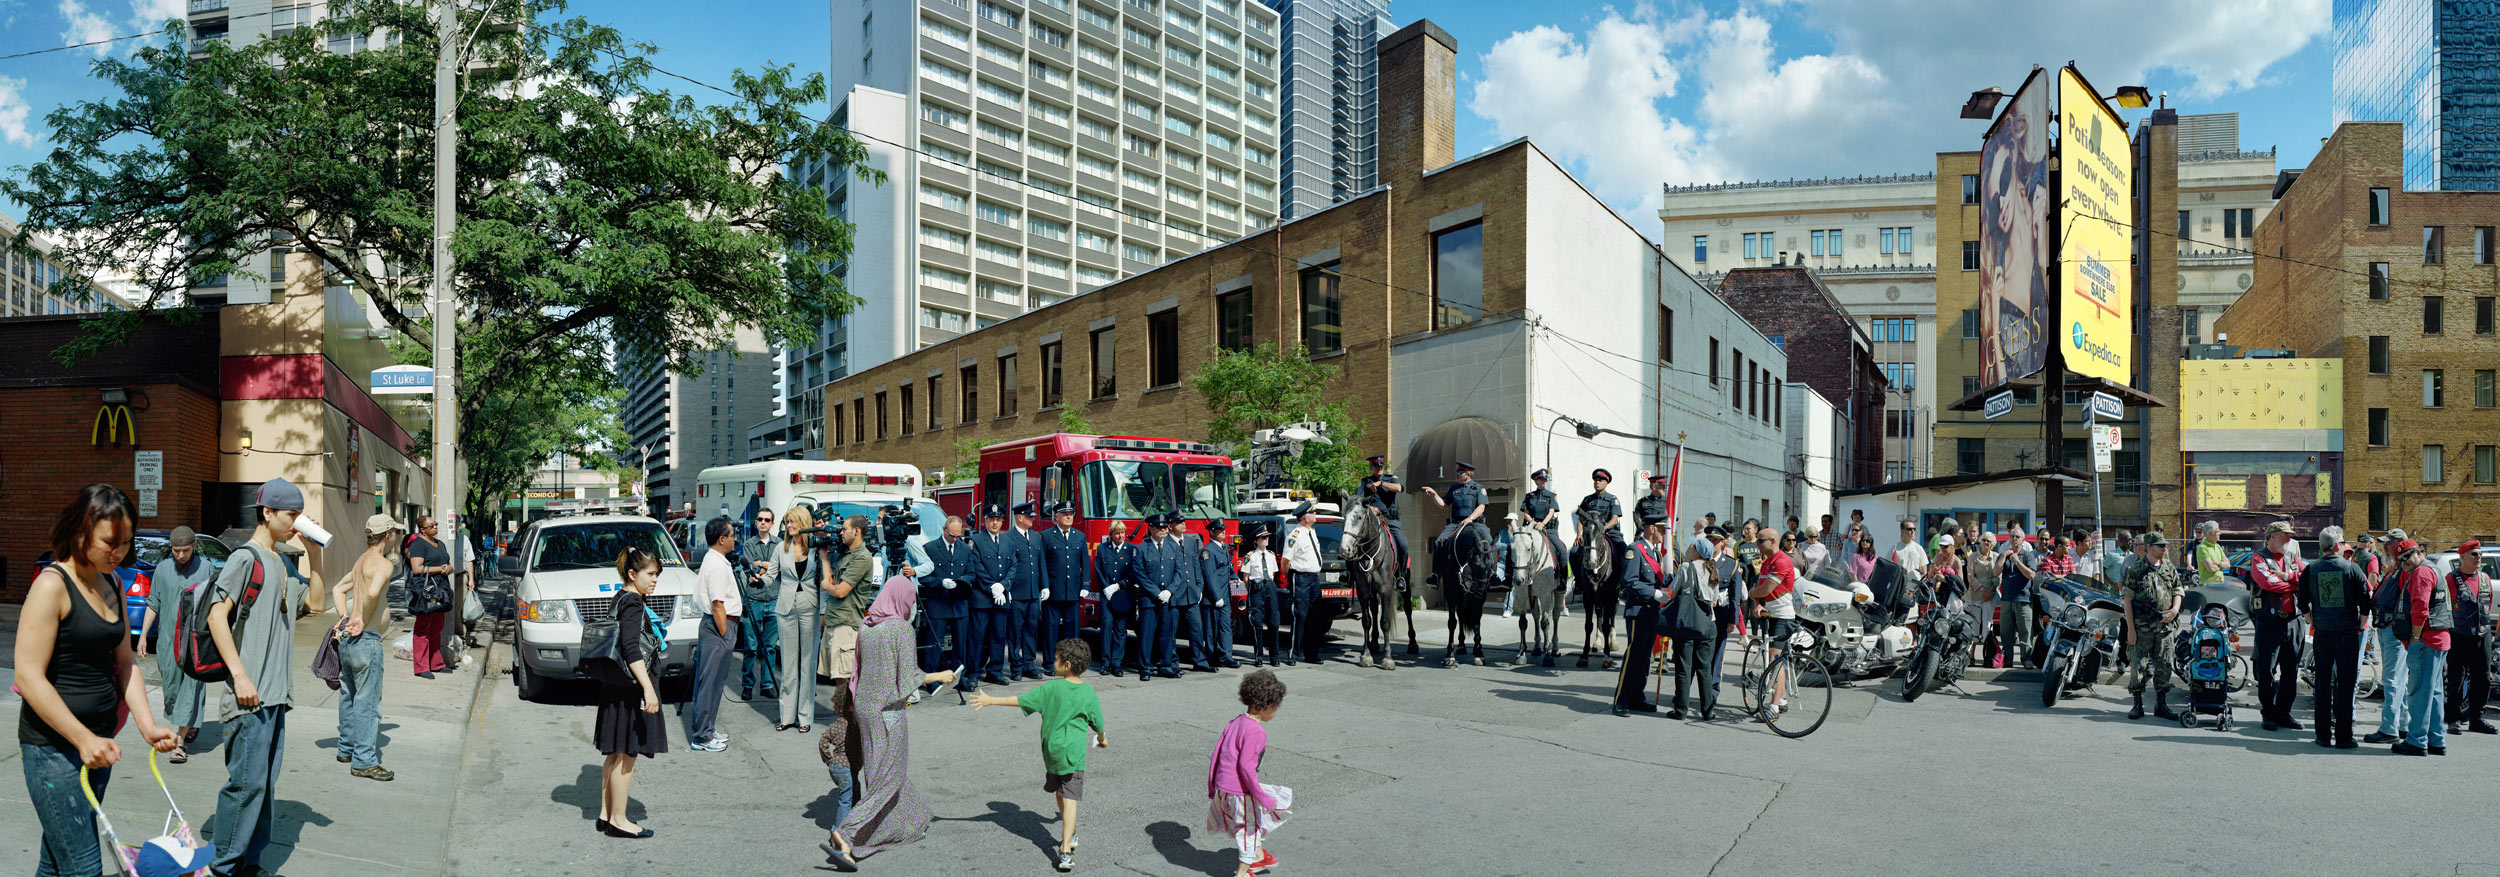 Corner of the Courageous, Repatriation Ceremony for Master Corporal Kristal and Private Andrew Miller, Grenville St., Toronto, Ontario, June 28, 2010.